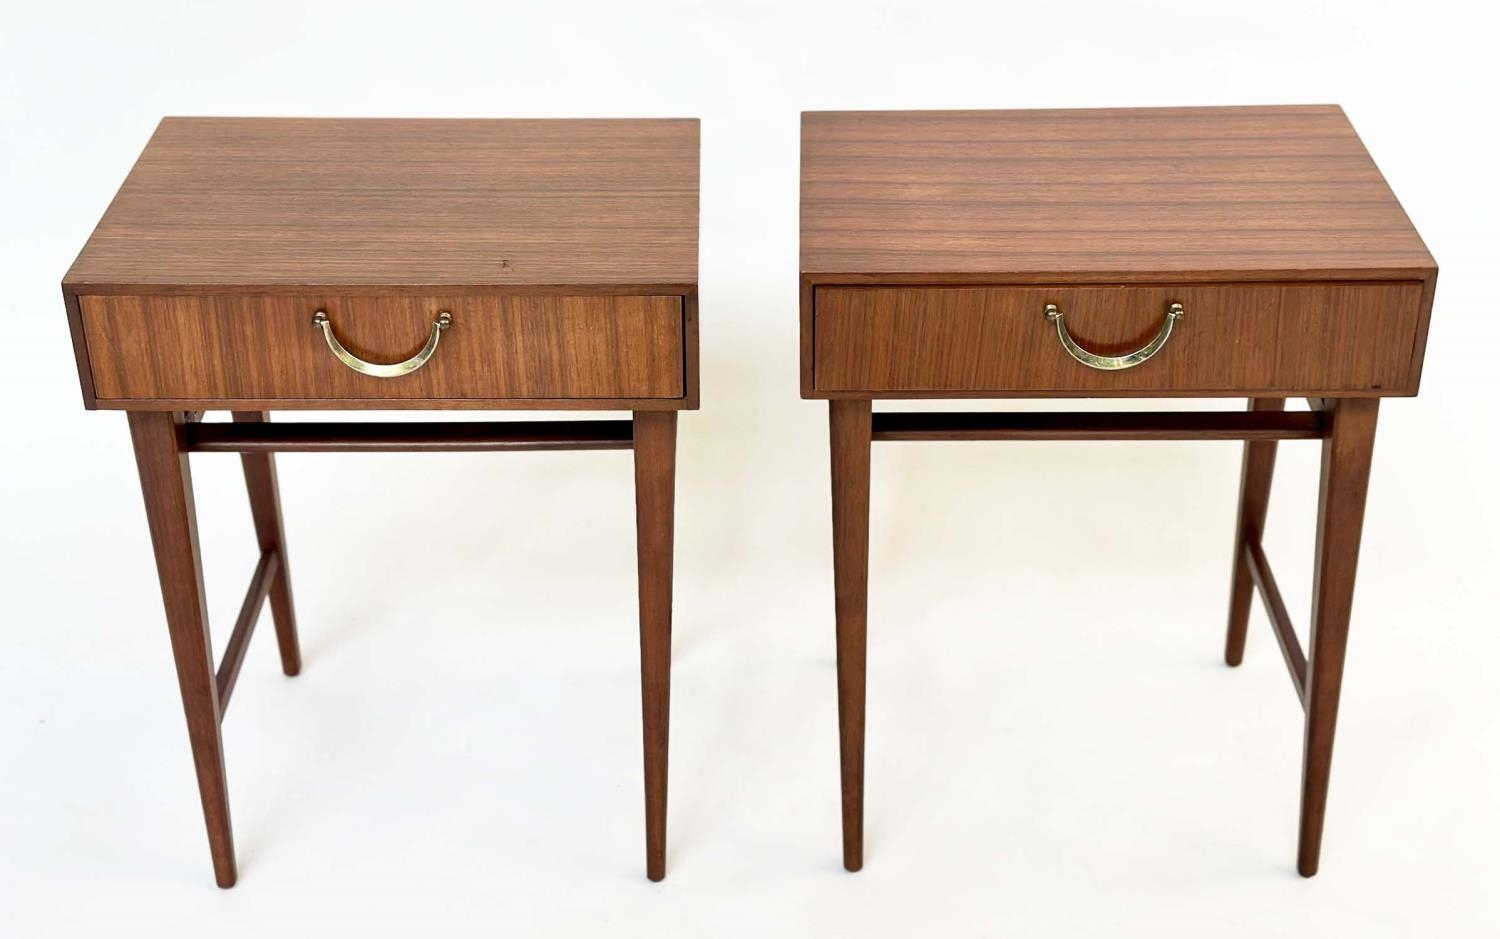 MEREDEW LAMP TABLES, a pair, 1970s Afromosia and teak, each with frieze drawer and stretchered